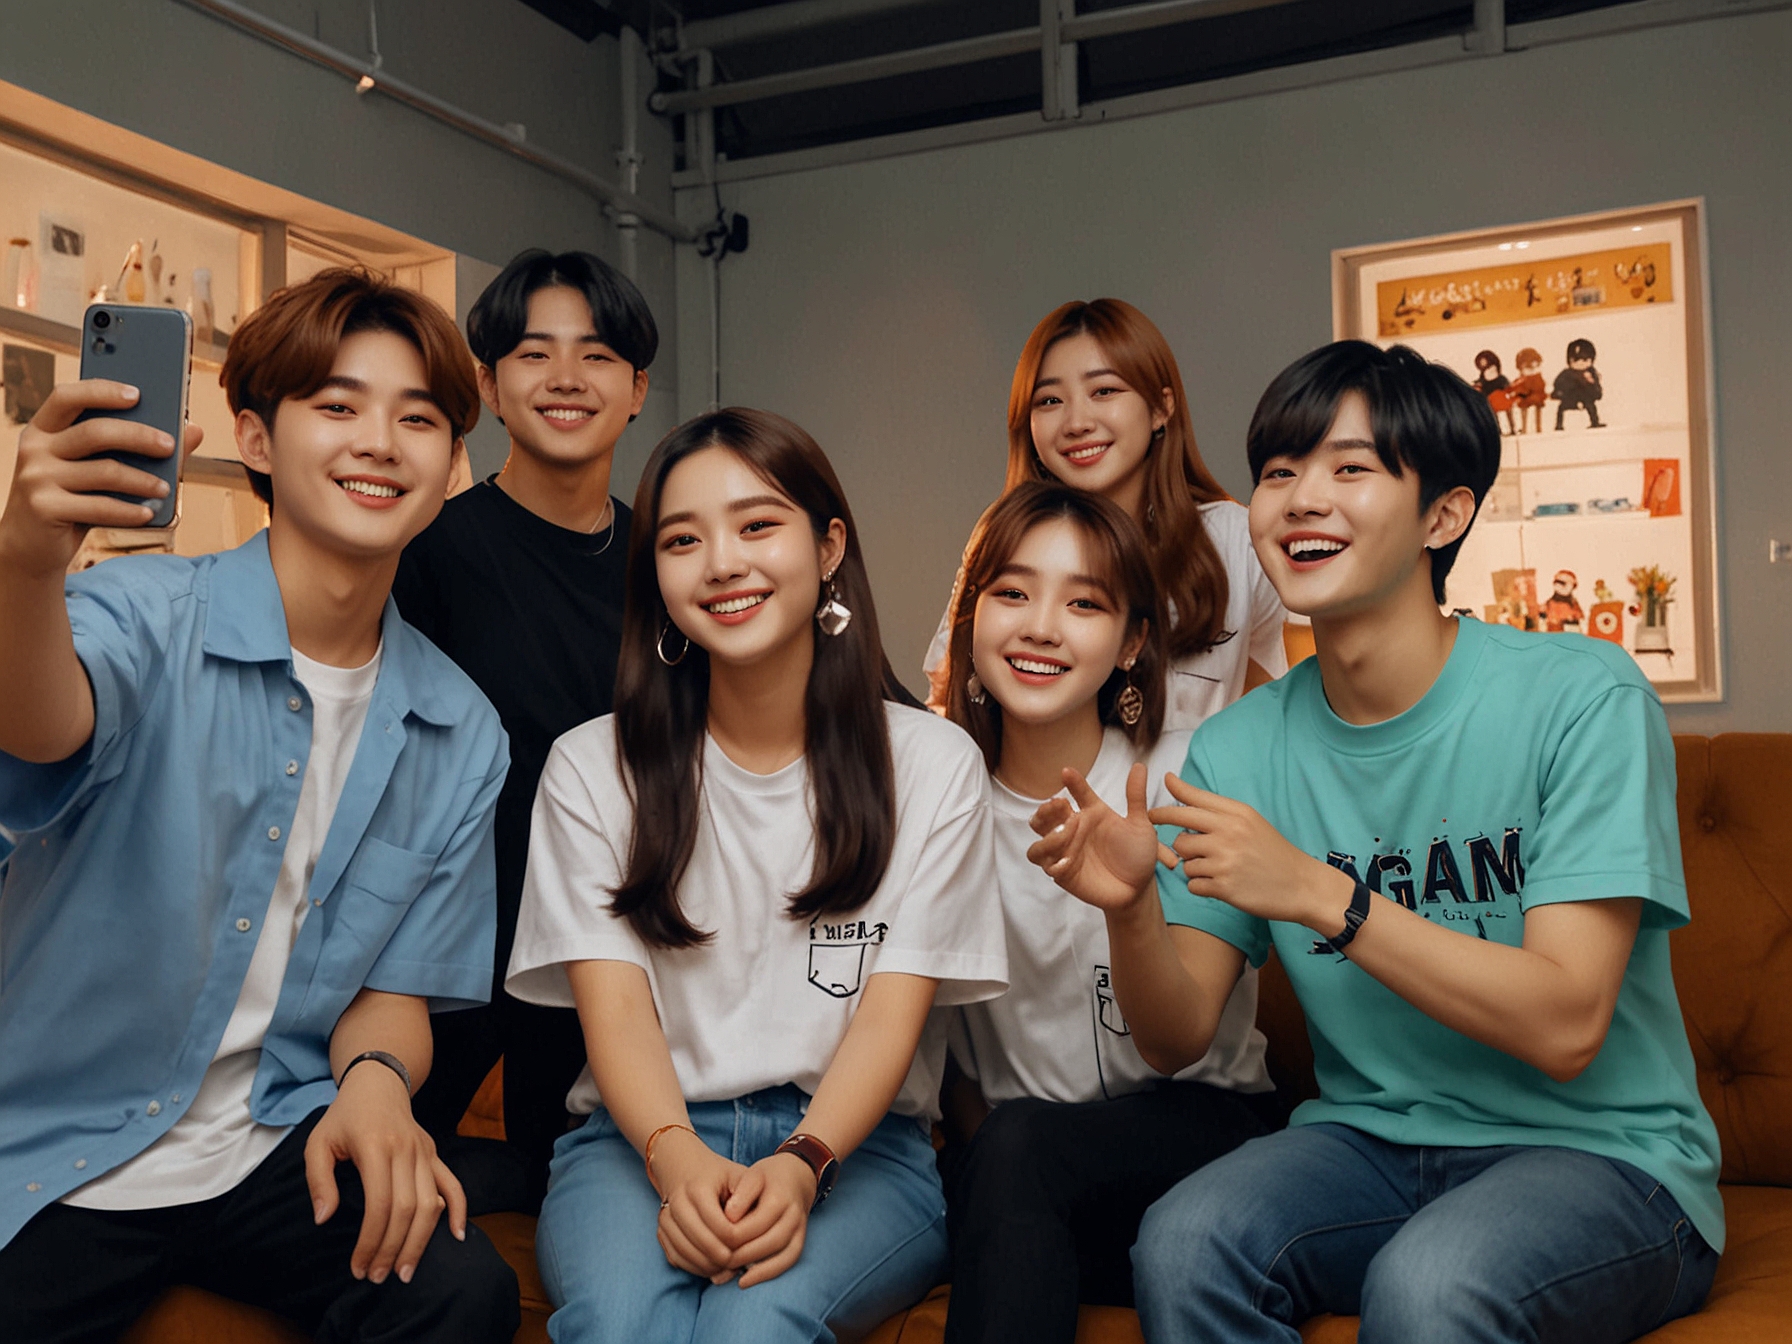 The members of BINI engaging with their fans during a live stream, showcasing their gratitude and maintaining a strong connection despite their hectic schedules as rising K-pop idols.